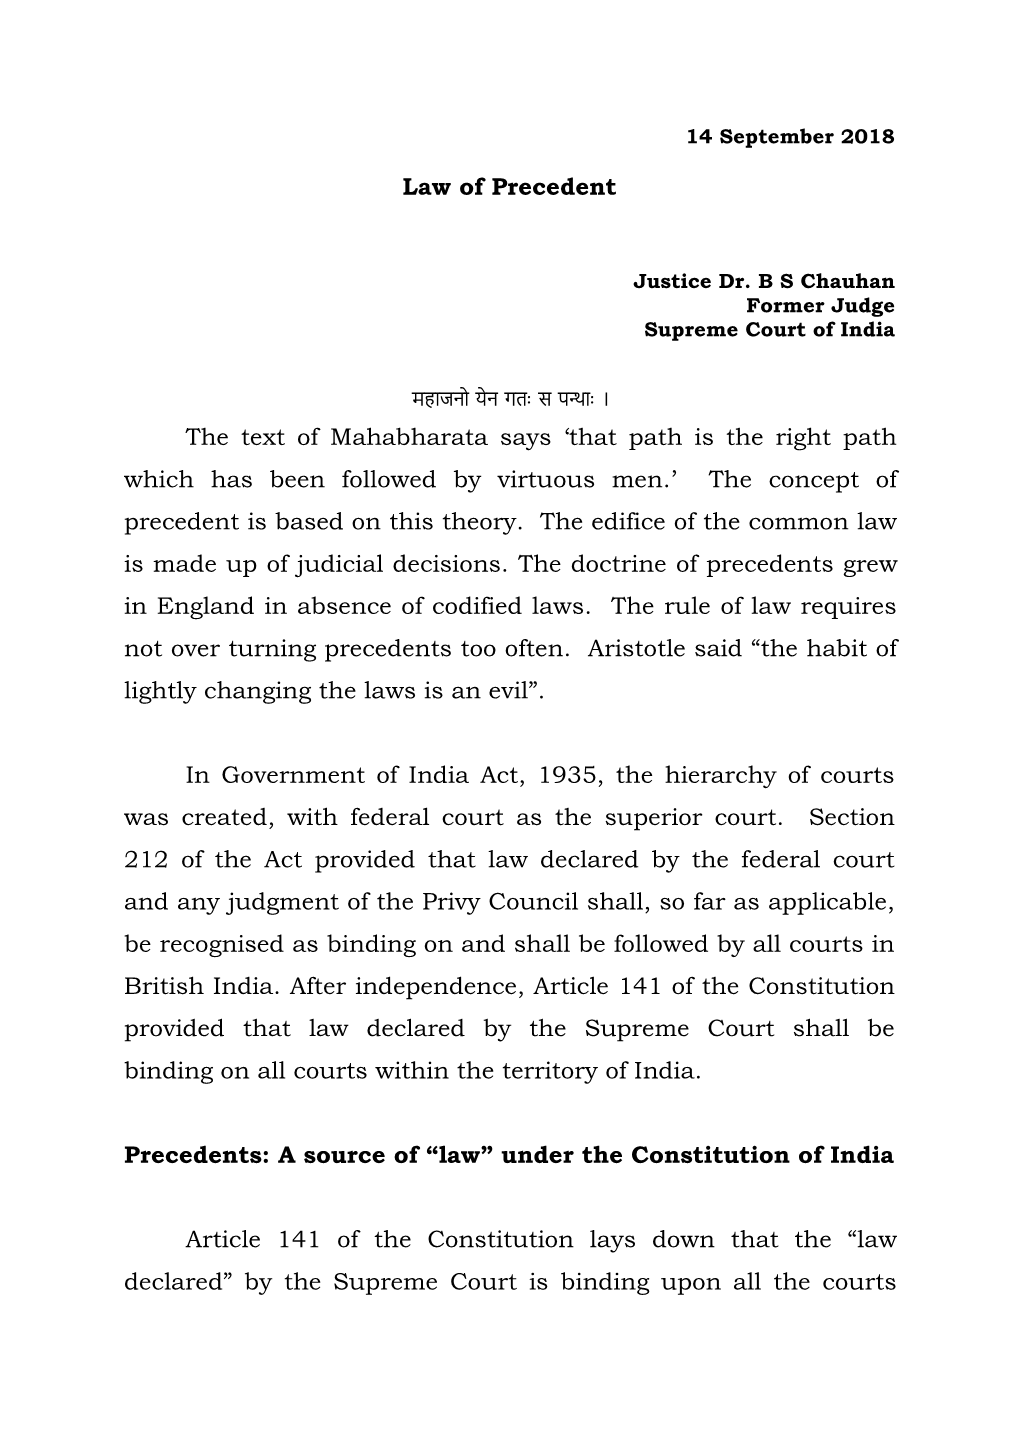 Law of Precedent the Text of Mahabharata Says